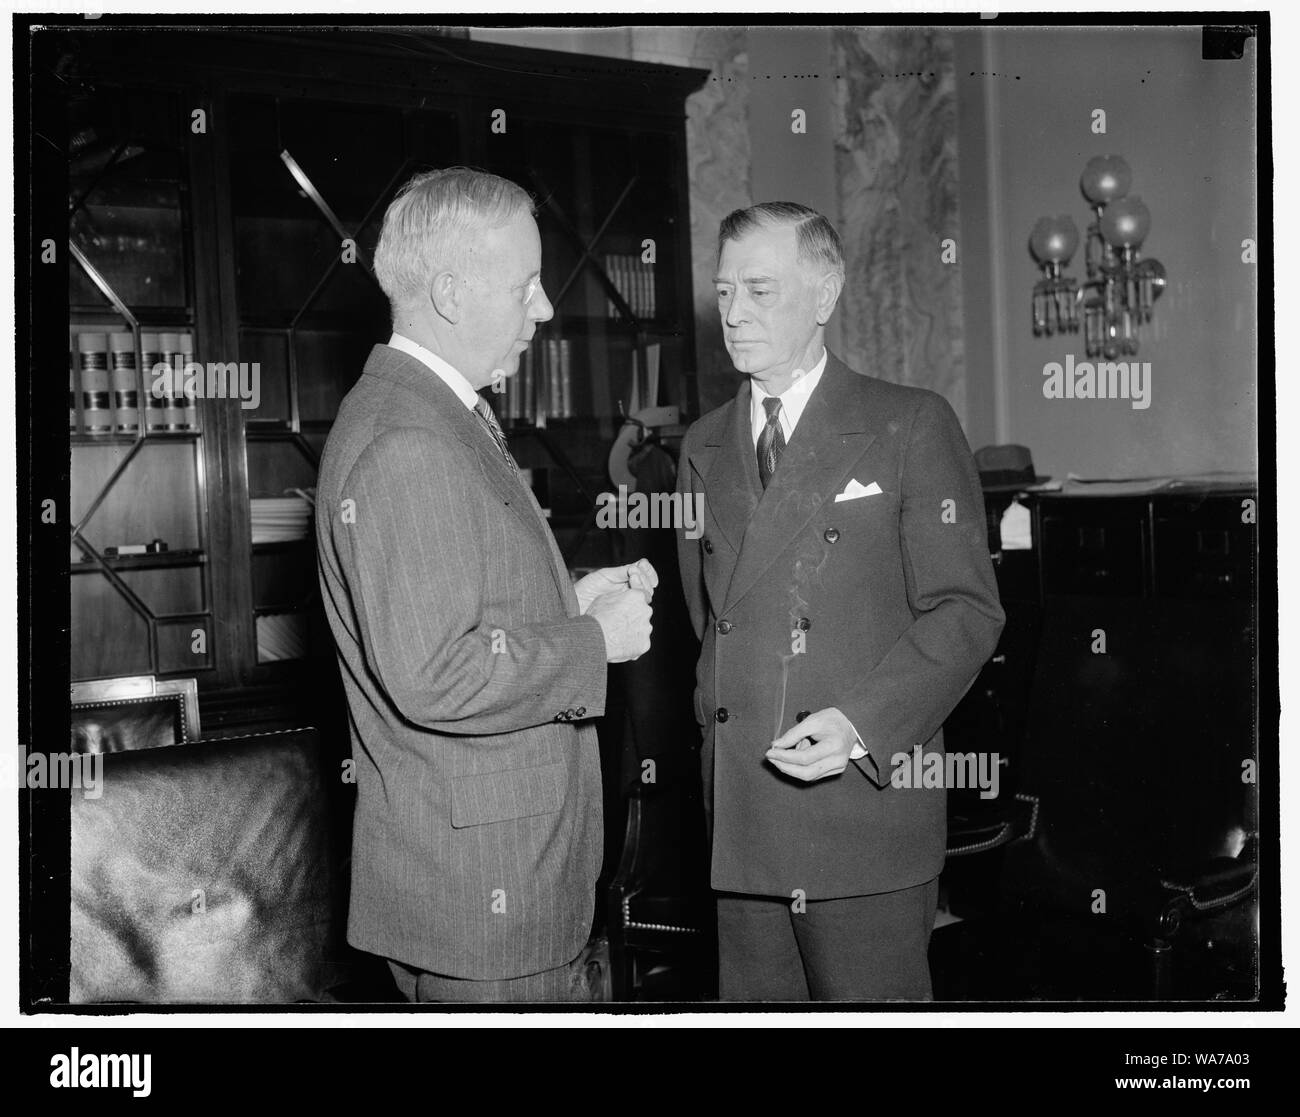 Admits Army finance office honored allegedly fraudulent CCC vouchers. Washington, D.C., Jan. 18. Major General Walter L. Reed, (left) Inspector General of the Army, today told Senator Key Pittman, Chairman of the Senate Public Lands Committee, the Army Chief Finance Offi[...] honor allegedly fraudulent CCC vouchers in go[...] faith. Reed made this declaration as he was [...] by the committee on the alleged defalcations o[...] Stitley, former Chief Voucher Clerk for the CCC [...] totaling $87,000, 1/18/38 Stock Photo